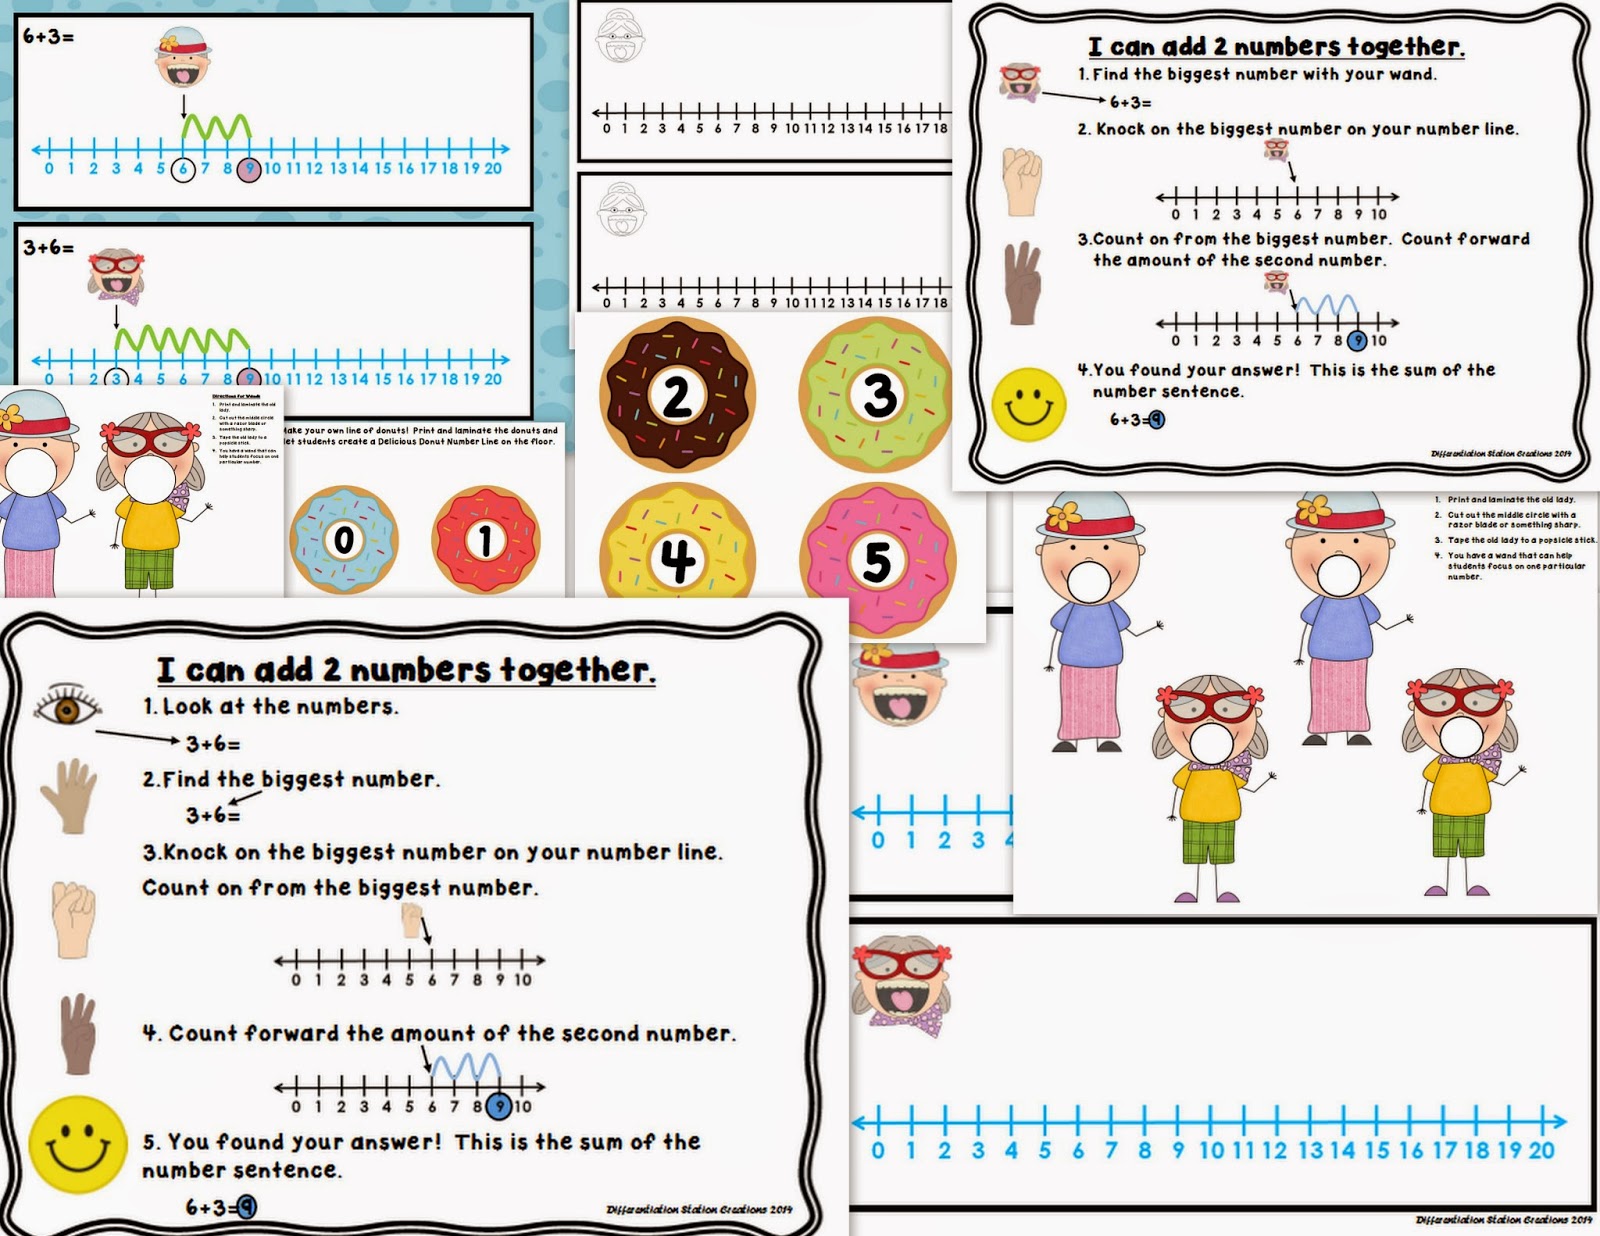 http://www.teacherspayteachers.com/Product/Delicious-Donuts-Addition-to-20-Number-Lines-Missing-Addends-Printables-1154026